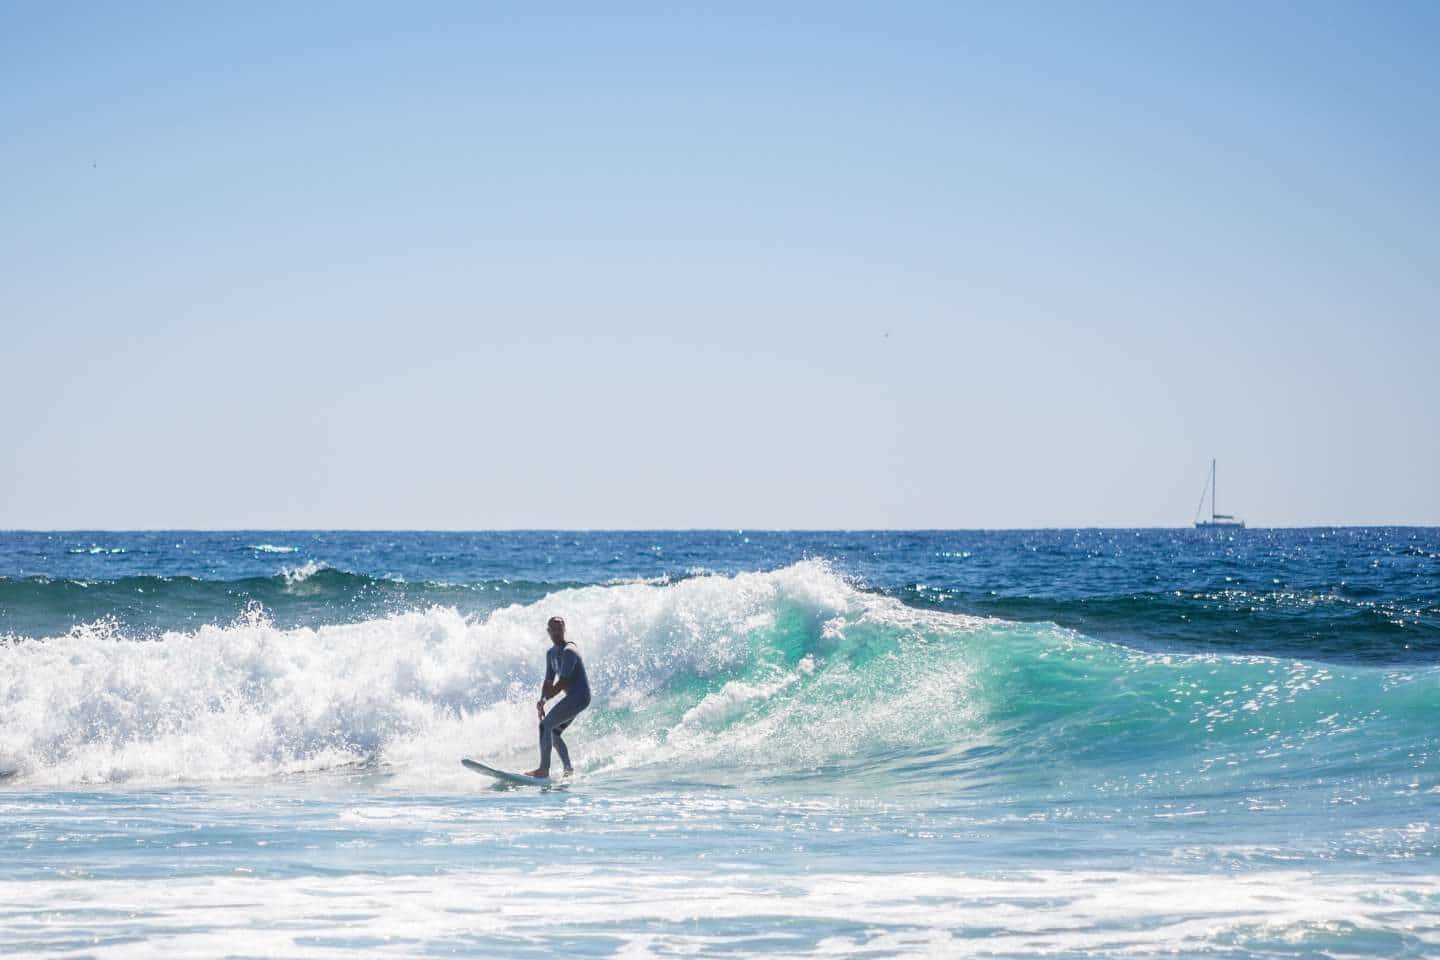 Surfing Perfect waves in Tenerife